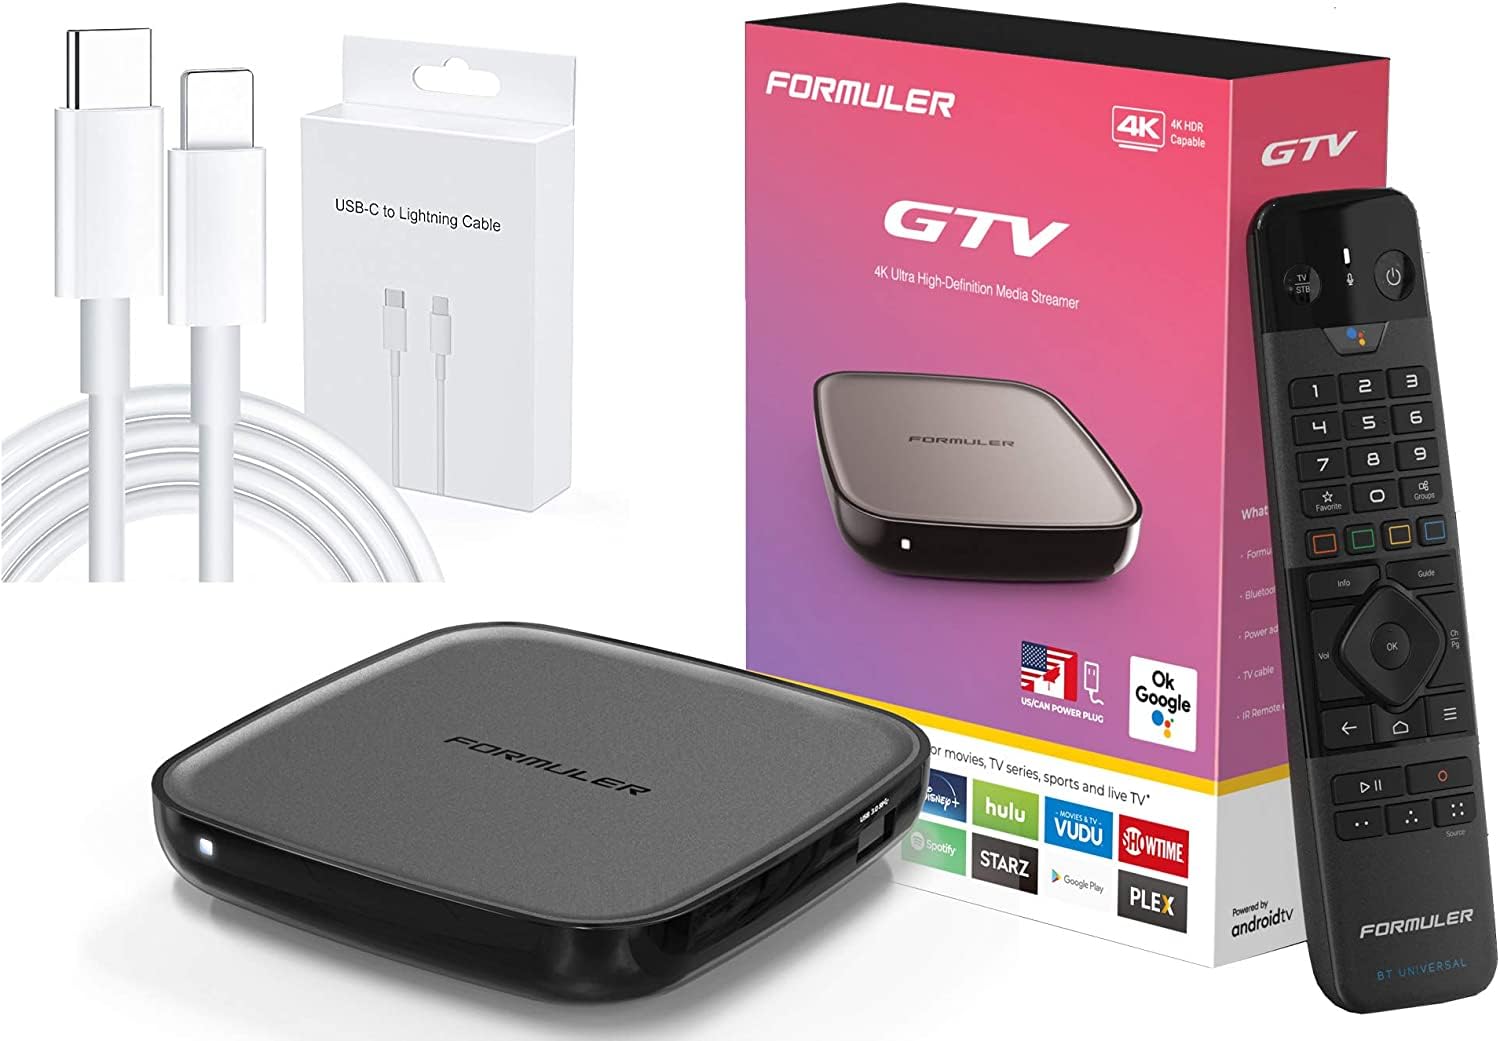 Formuler Gtv Certified Android Tv OS 9.0 with Real Bluetooth Voice Remote Control + Bonus USB Type C to Lightning Cable